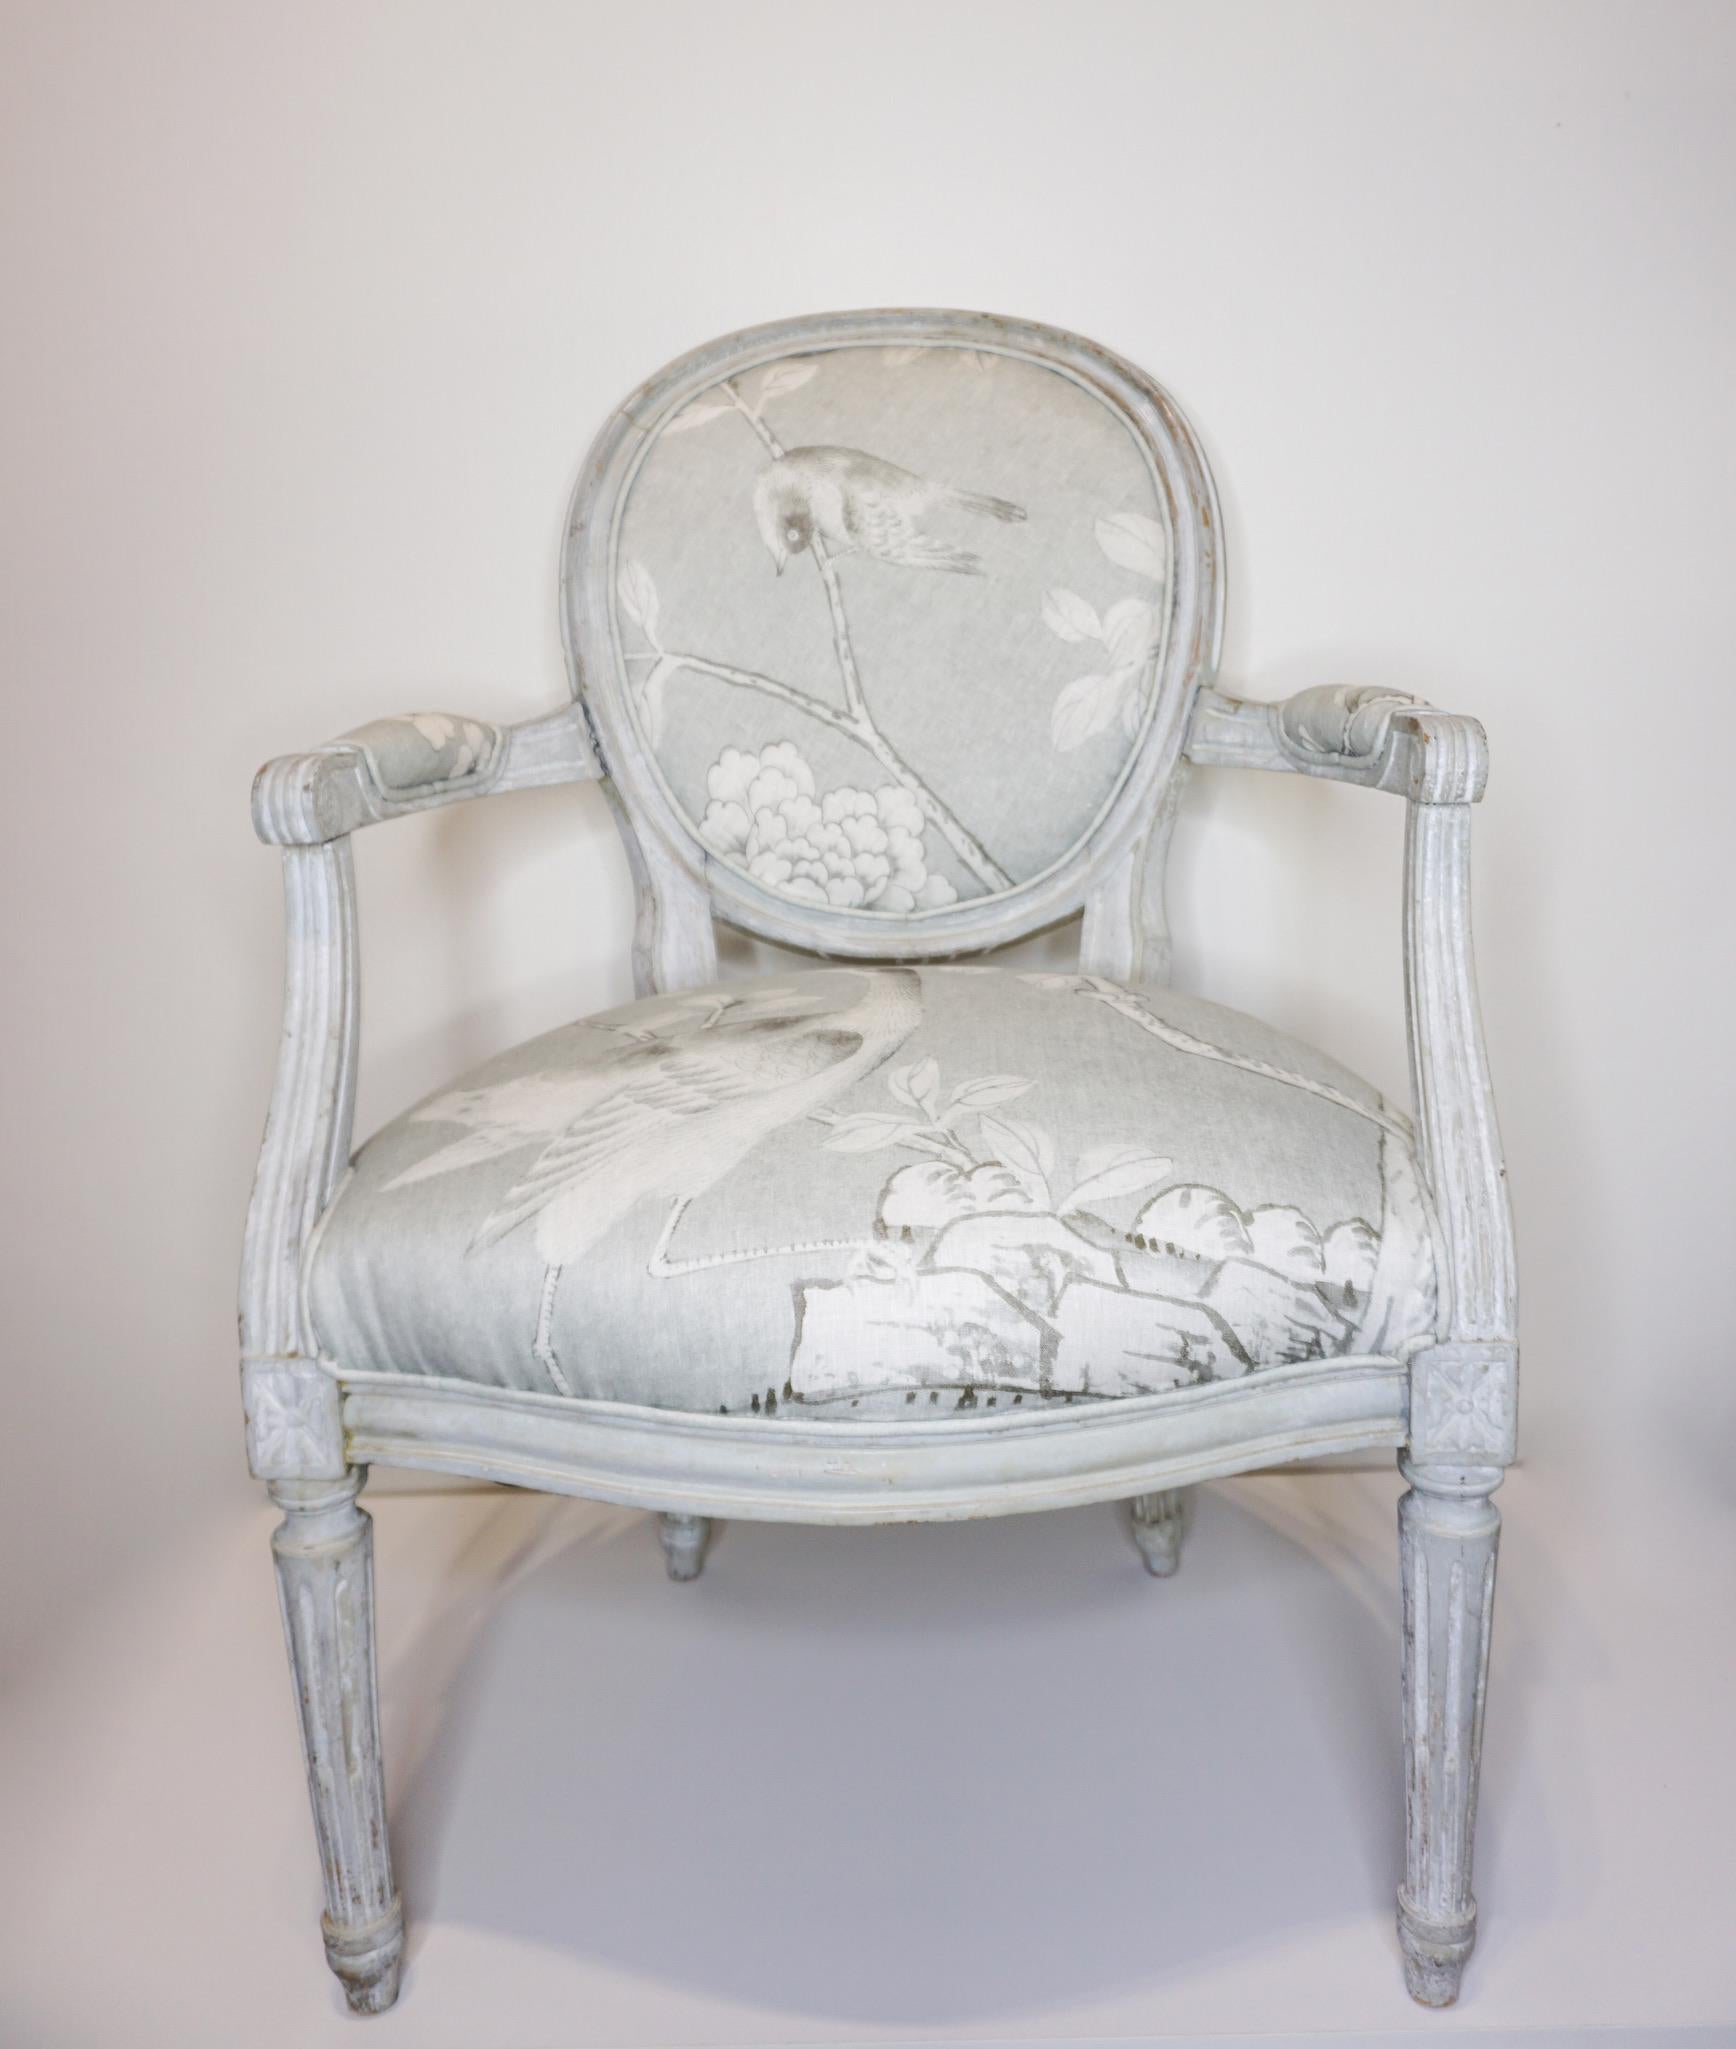 Early 1900's Louis XIV Style Chairs, Slipcovered in Manuel Canovas Fabric In Good Condition For Sale In Dallas, TX